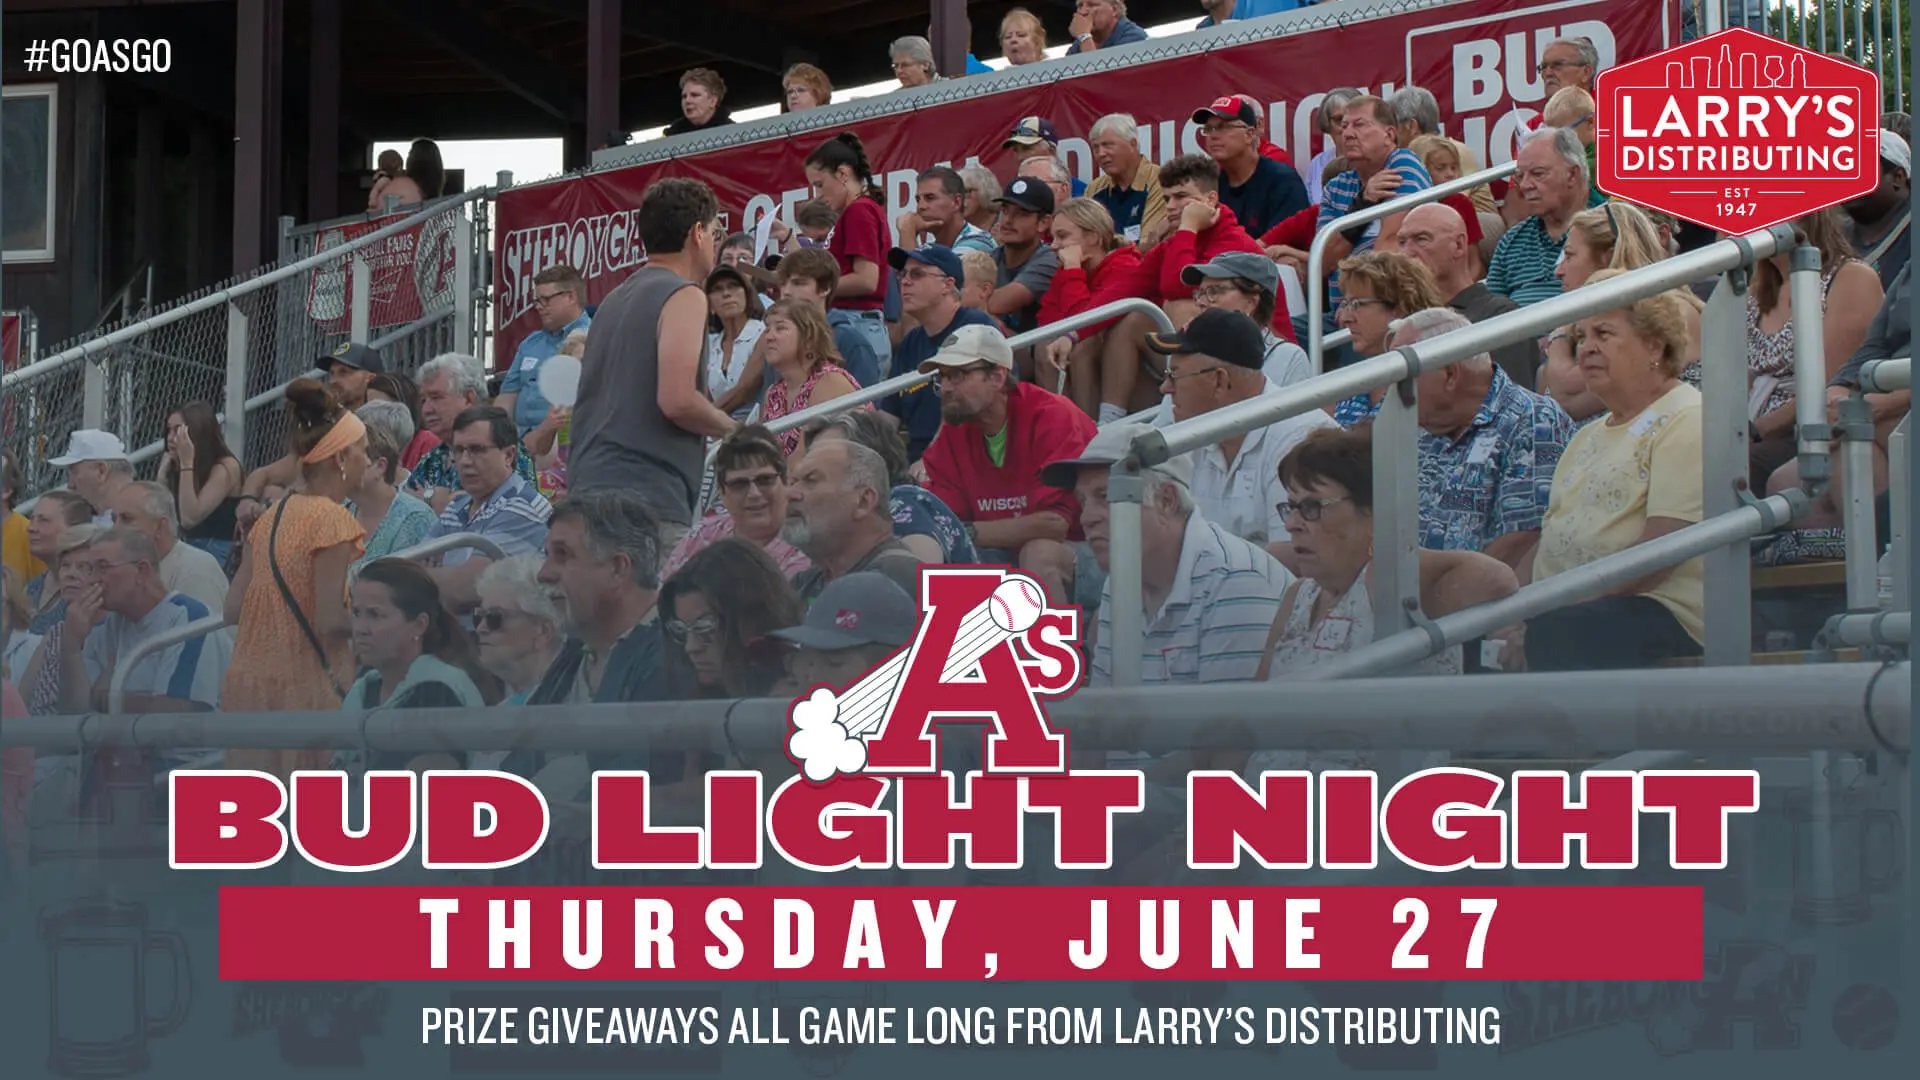 Bud Light Night, presented by Larry's Distributing